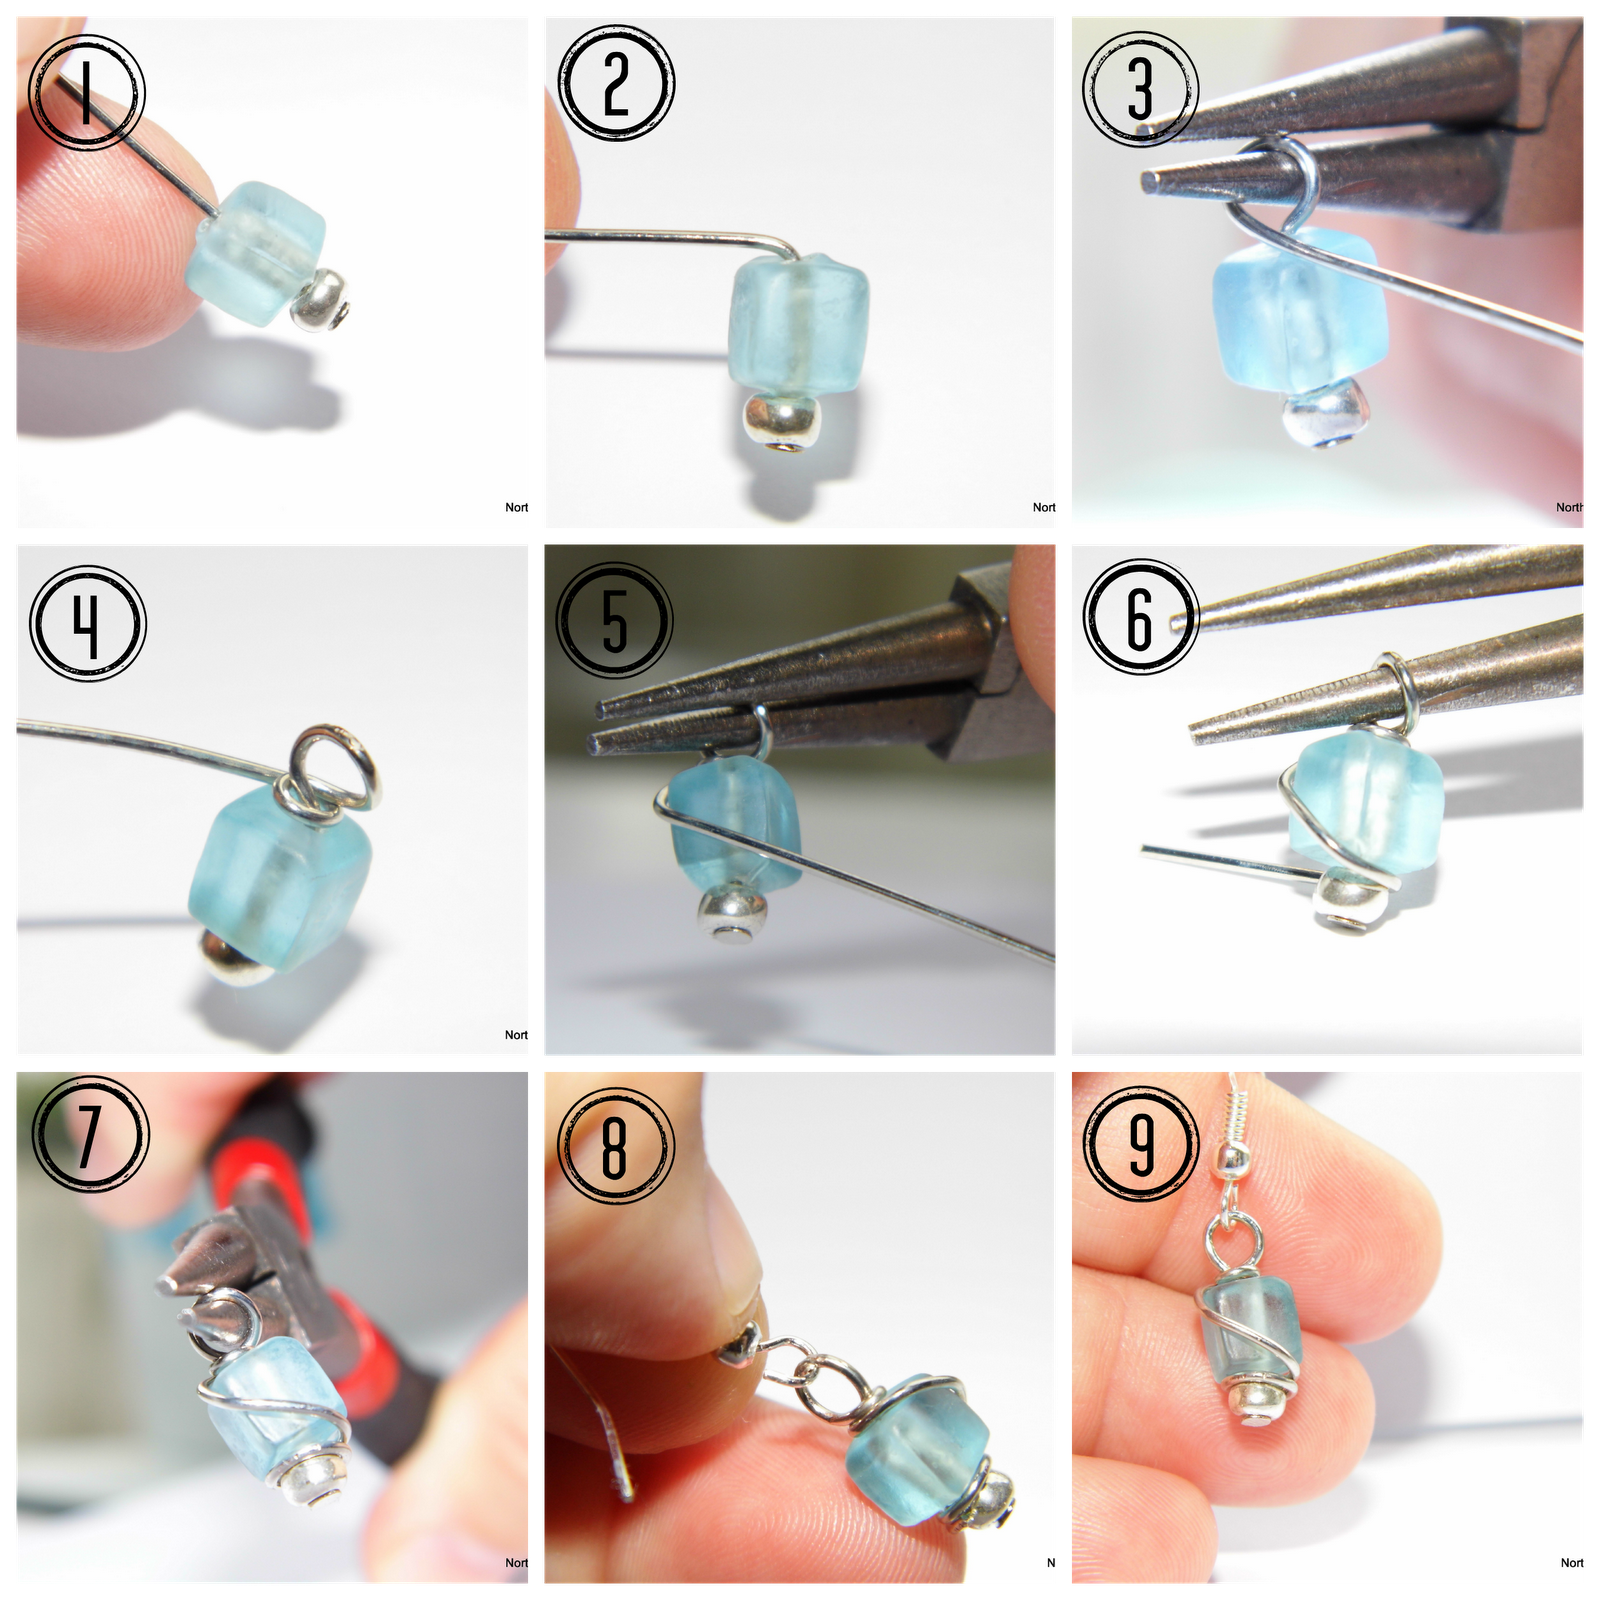 How We Make Our Sea Glass Jewelry